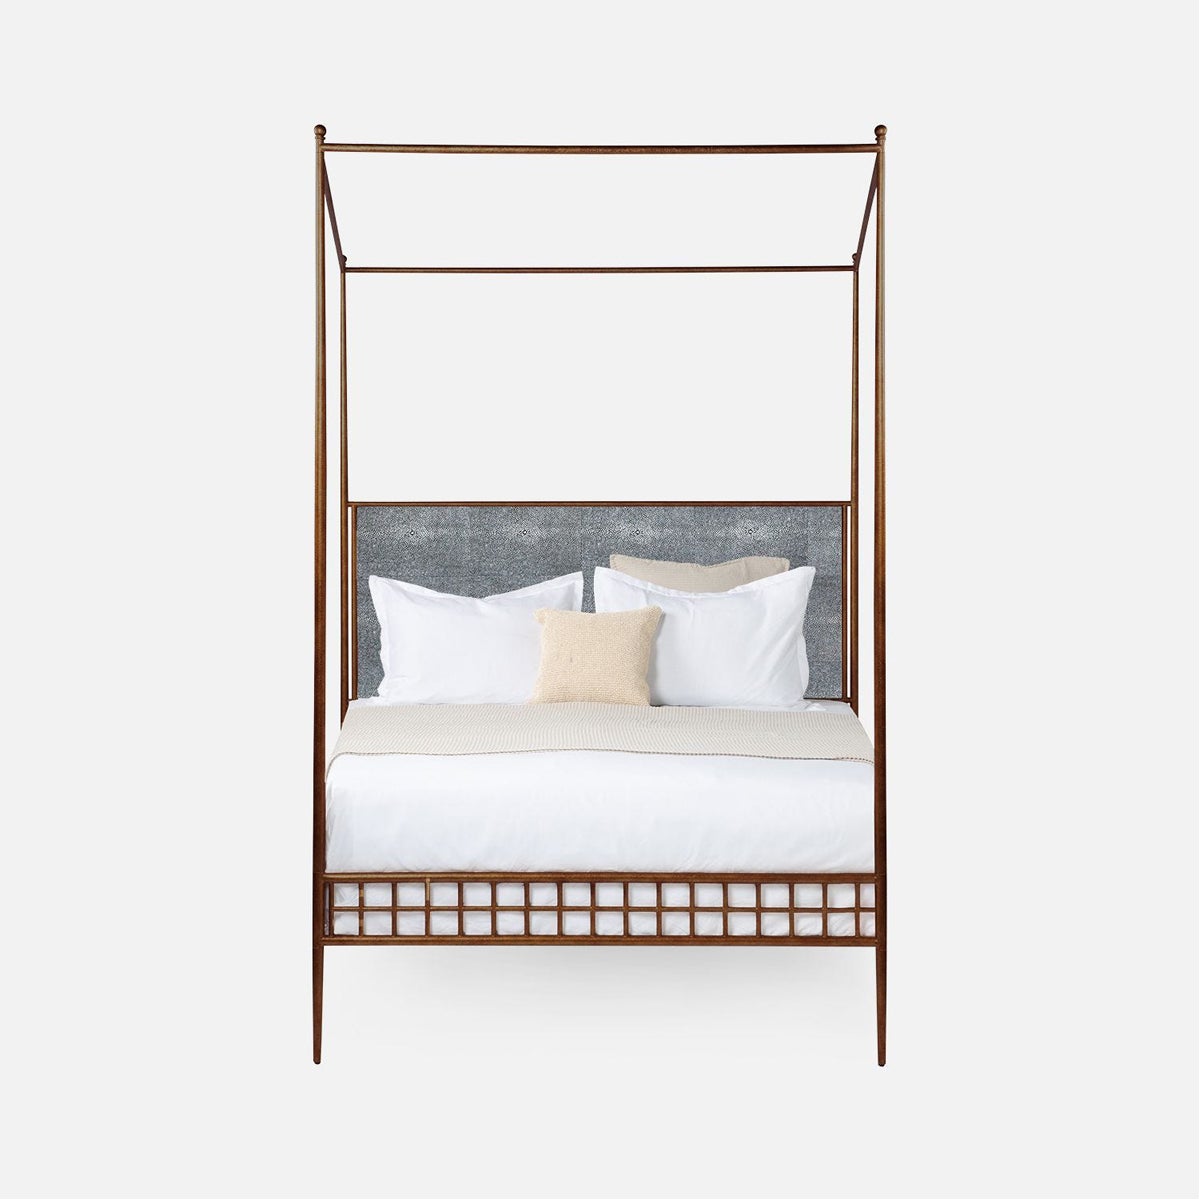 Made Goods Hamilton Textured Iron Canopy Bed in Bassac Leather